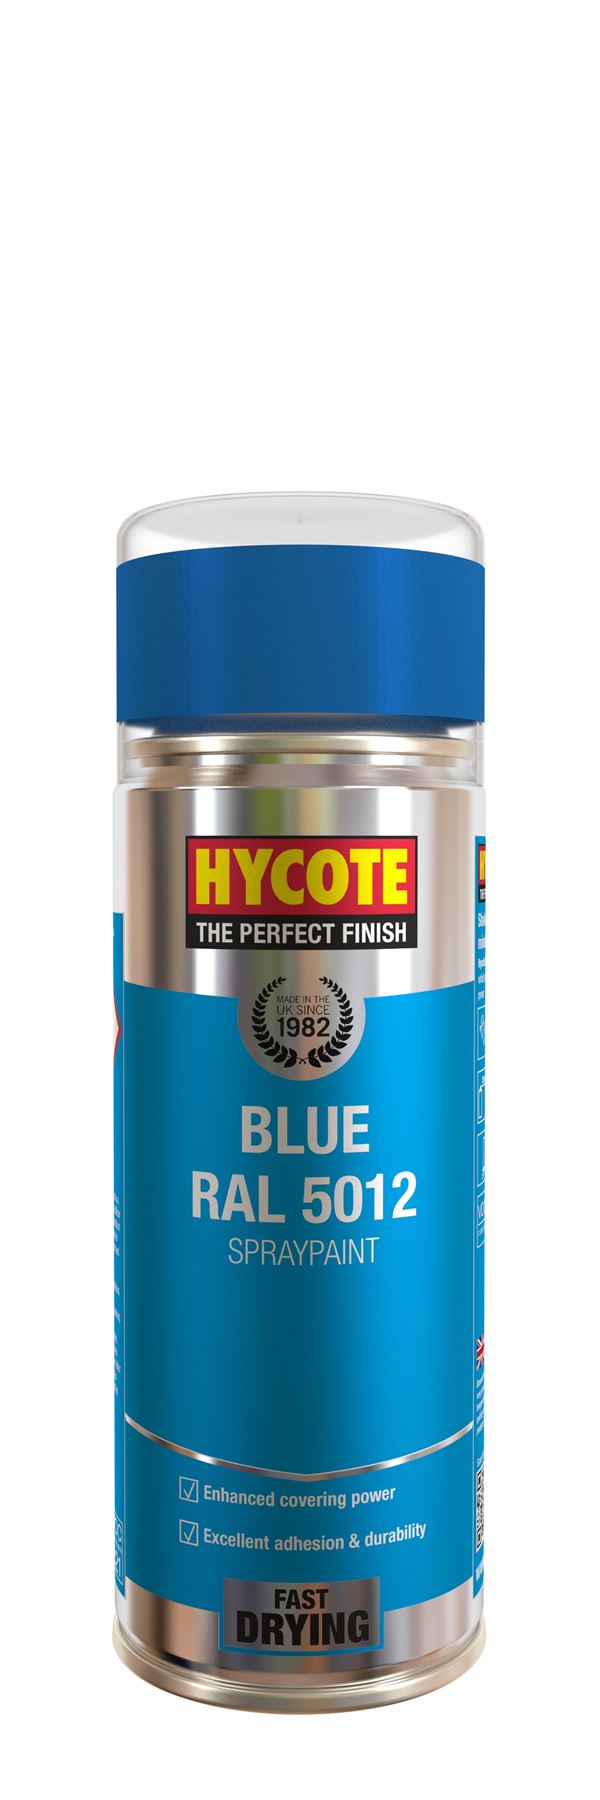 Hycote Blue Ral 5012 Paint - 400ml